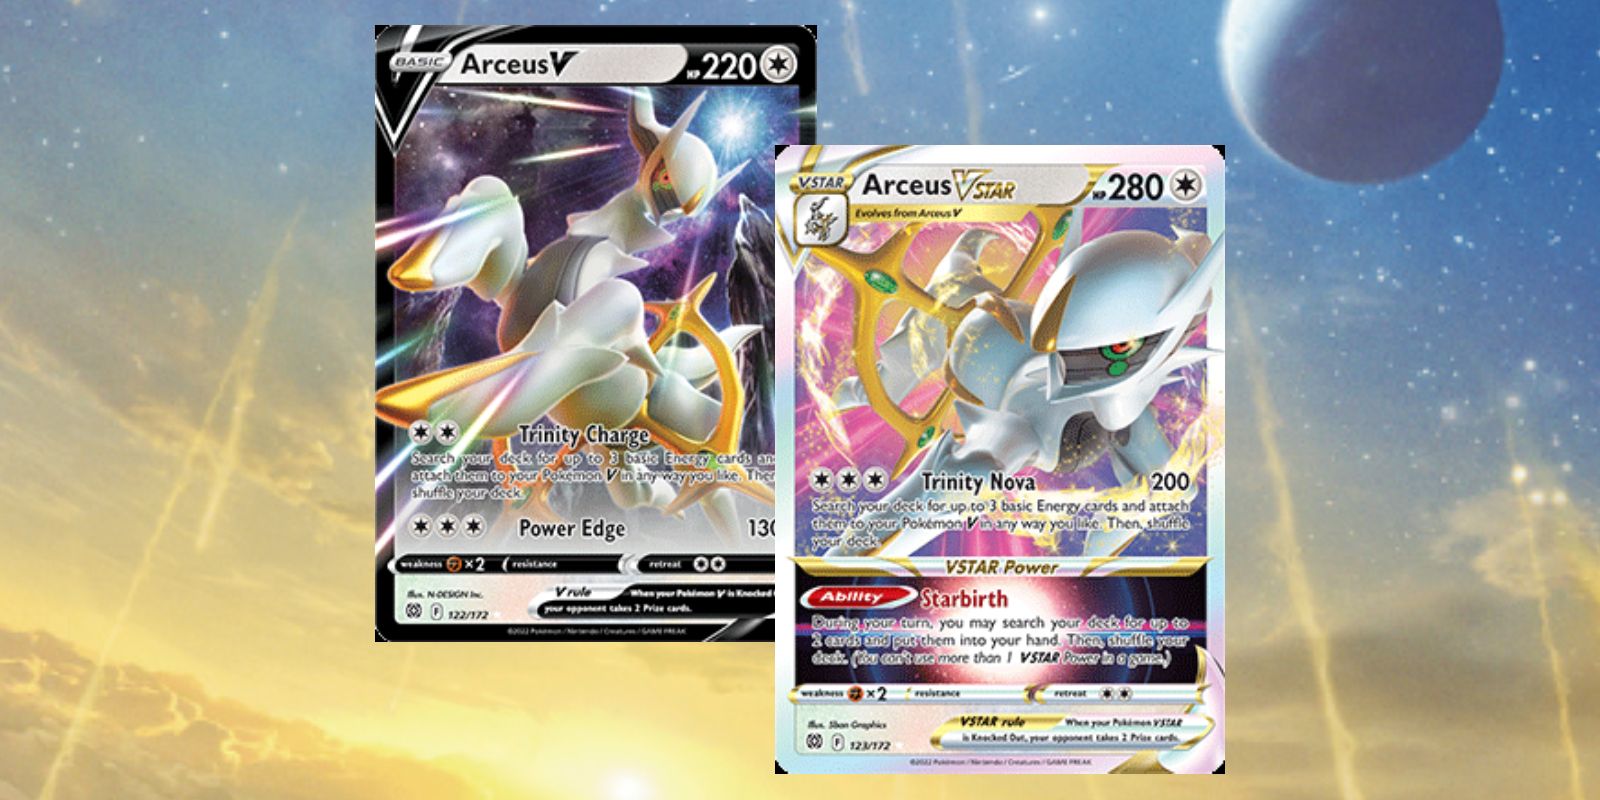 The Arceus V and Arceus VSTAR cards are the most expensive in the Arceus VSTAR/Flying Pikachu VMAX Pokémon TCG deck.